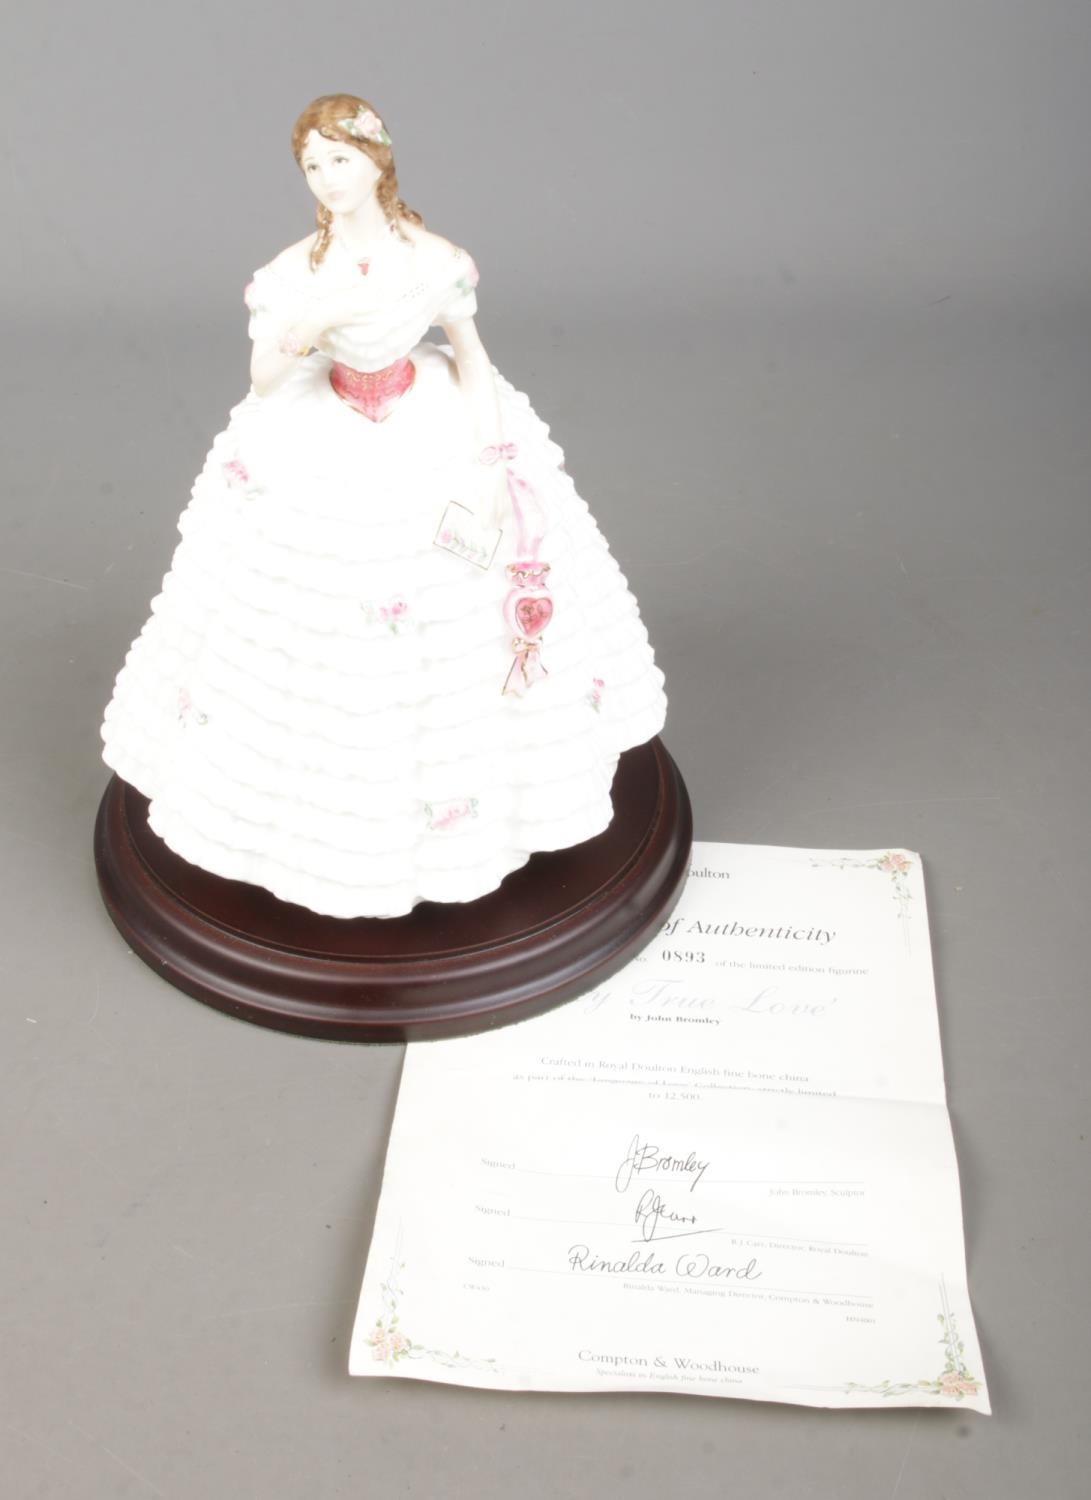 A limited edition Royal Doulton ceramic figure 'My True Love' (HN4001) by John Bromley from the '